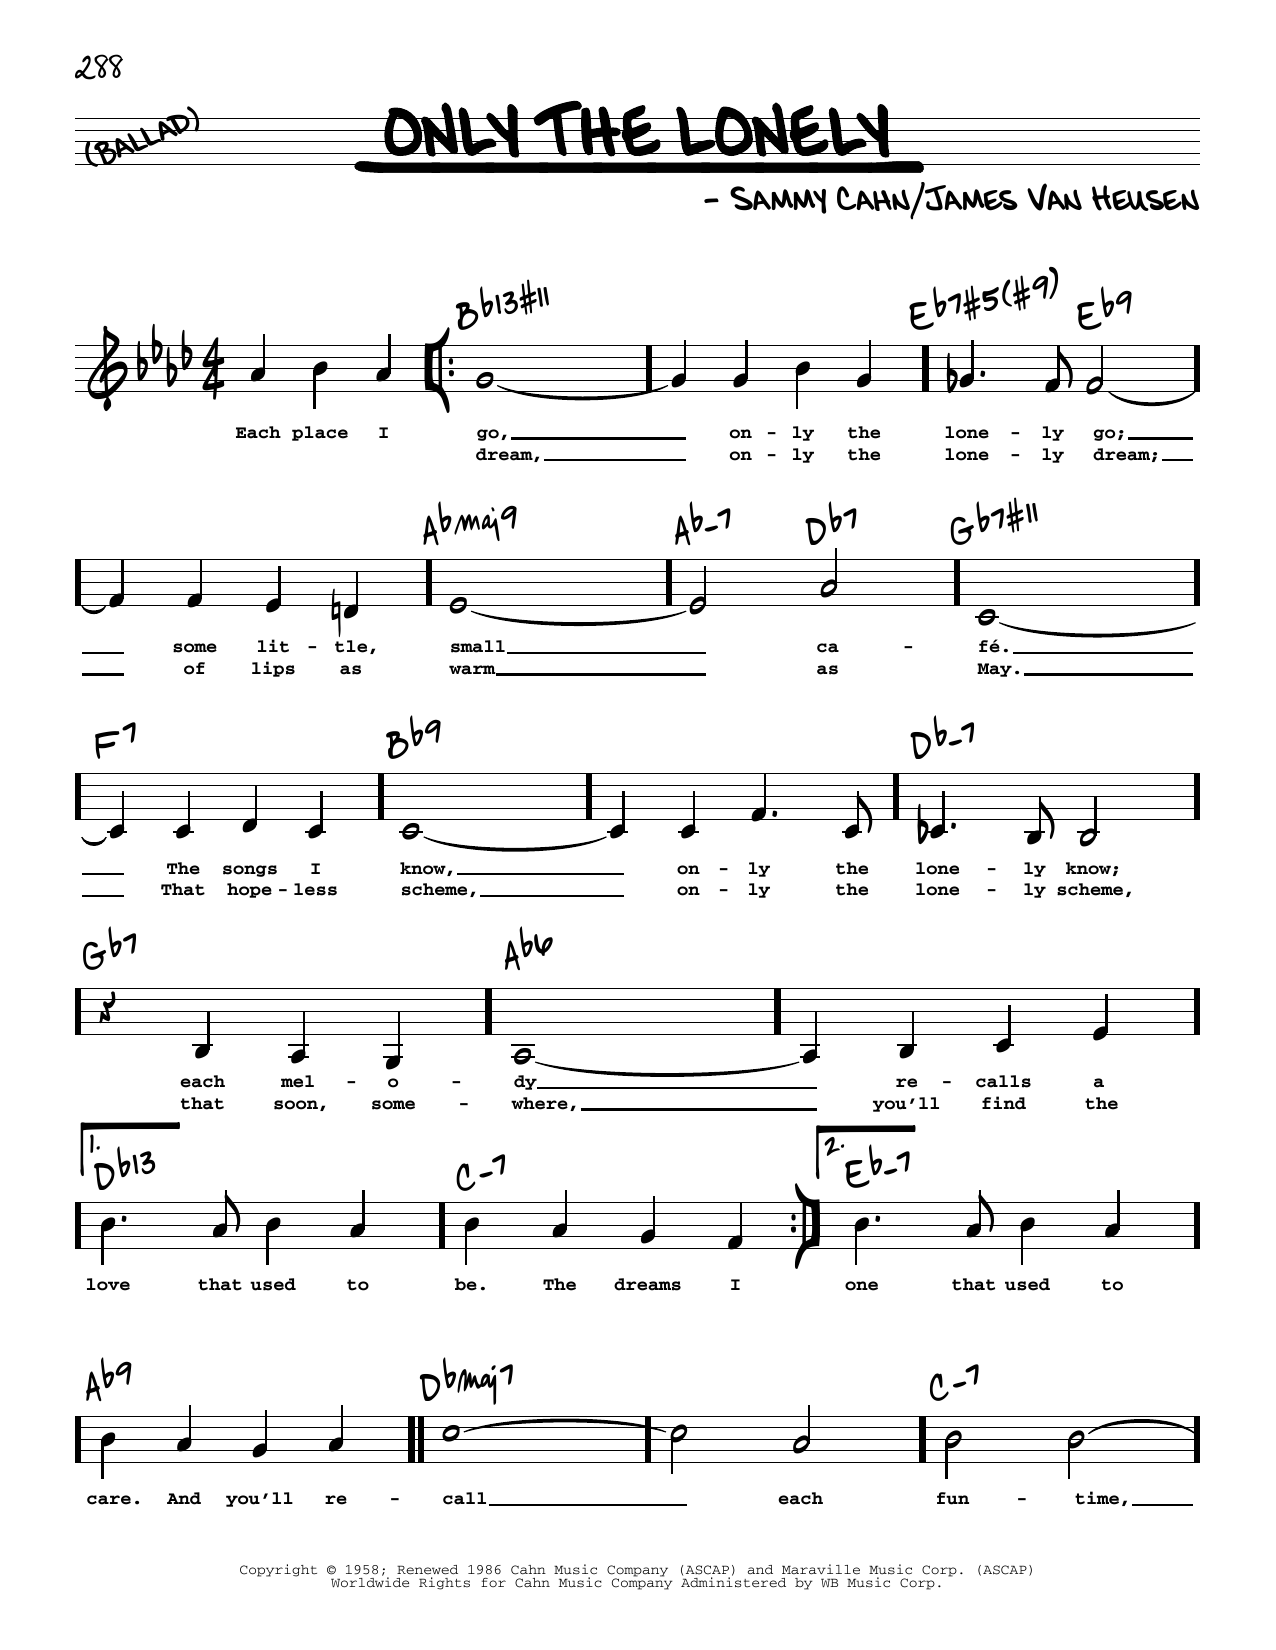 James Van Heusen Only The Lonely (Low Voice) sheet music notes printable PDF score